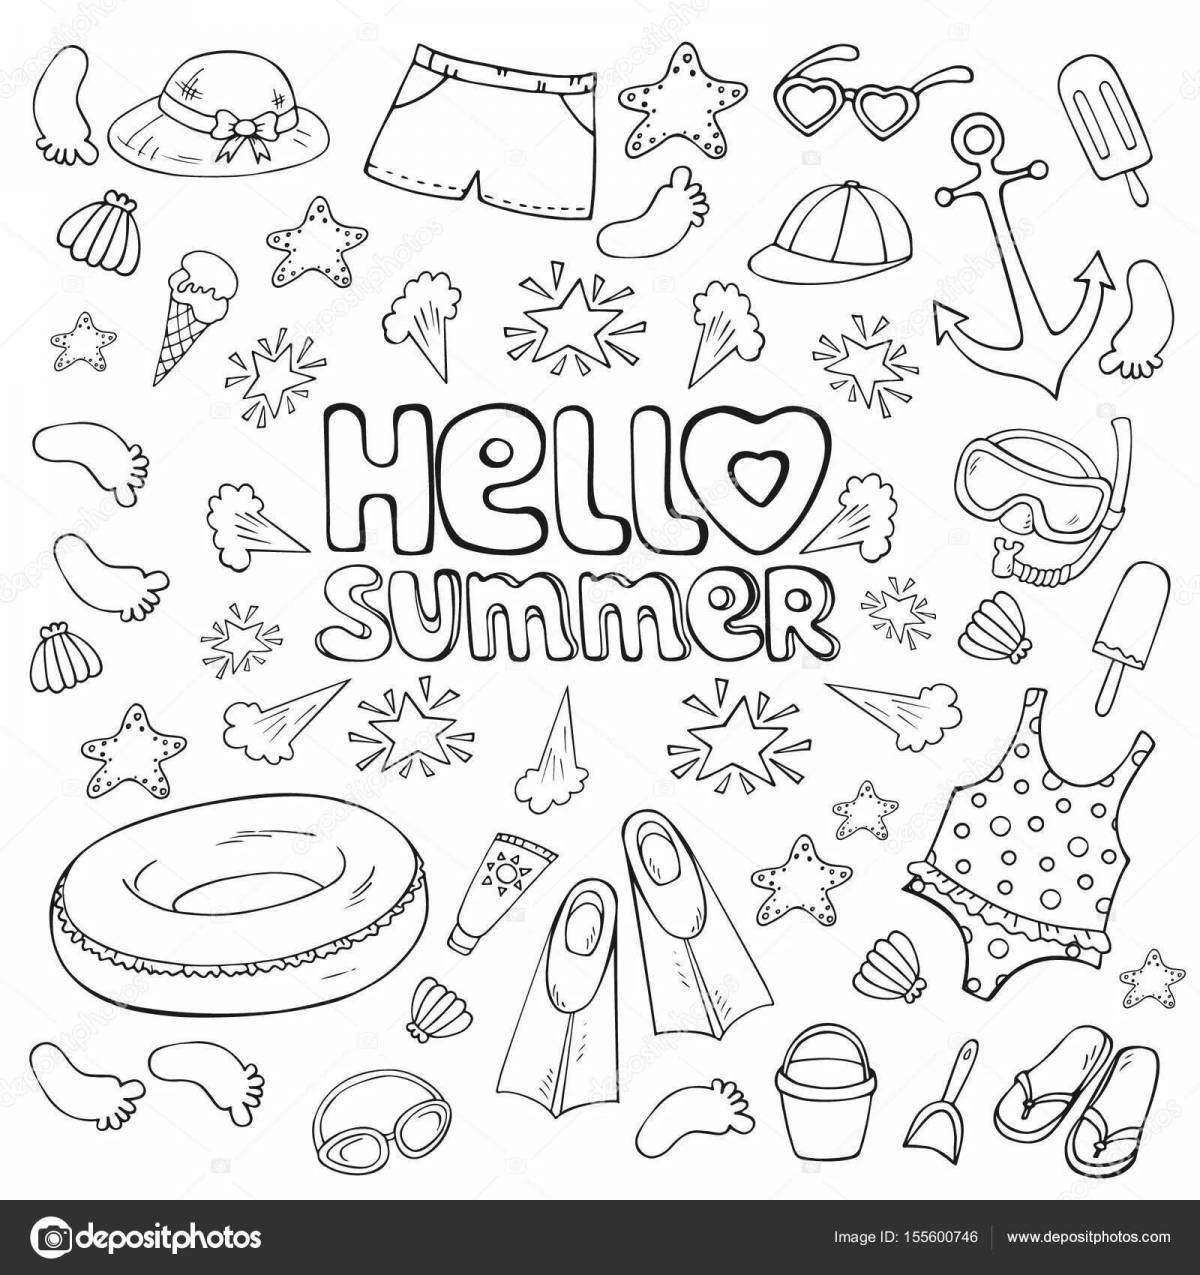 Playful stickers for coloring diary